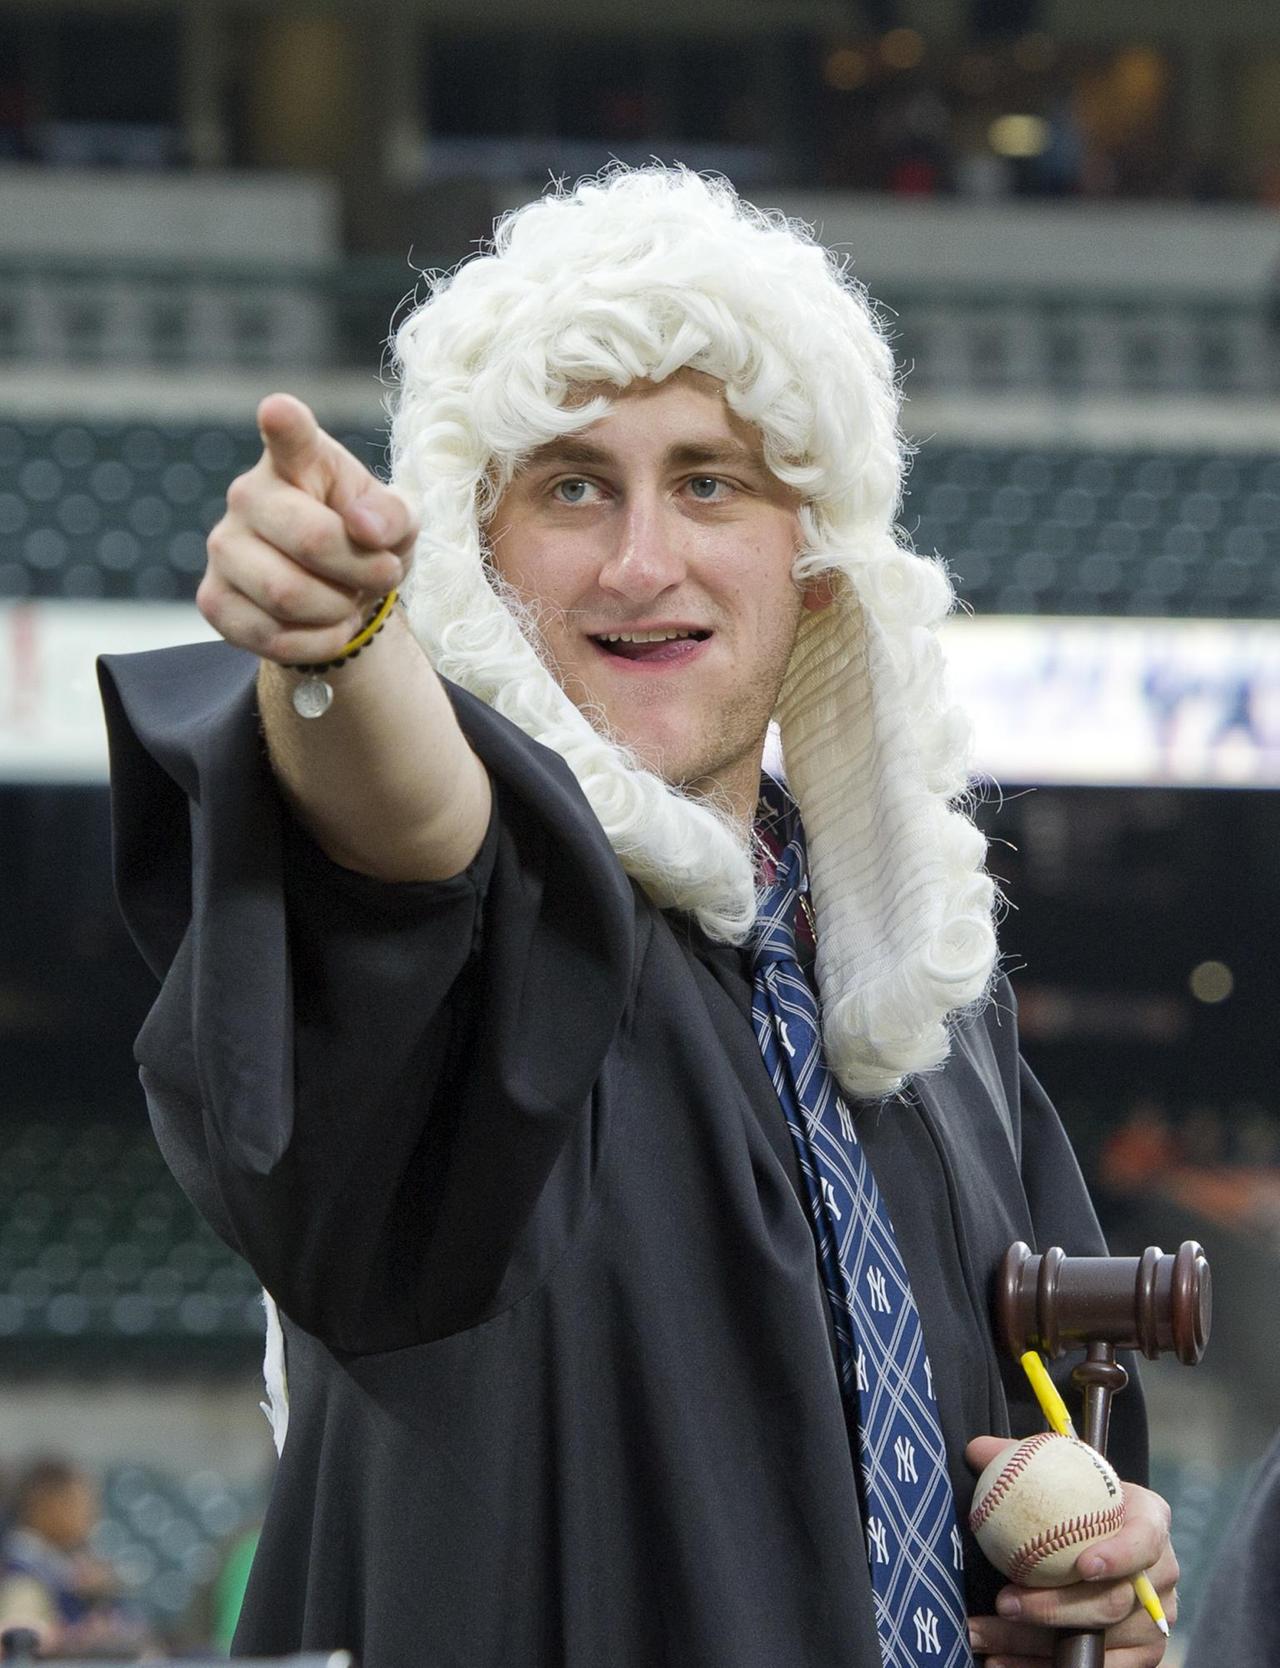 Alek Bernold of Utica, New York, wearing a traditional judge's wig and robe, cheers for New York Yankees right fielder Aaron Judge (99) prior to the game against the Baltimore Orioles at Oriole Park at Camden Yards in Baltimore, MD on Tuesday, May 30, 2017. Credit: Ron Sachs / CNP (RESTRICTION: NO New York or New Jersey Newspapers or newspapers within a 75 mile radius of New York City) Foto: Ron Sachs/Consolidated/dpa | Verwendung weltweit